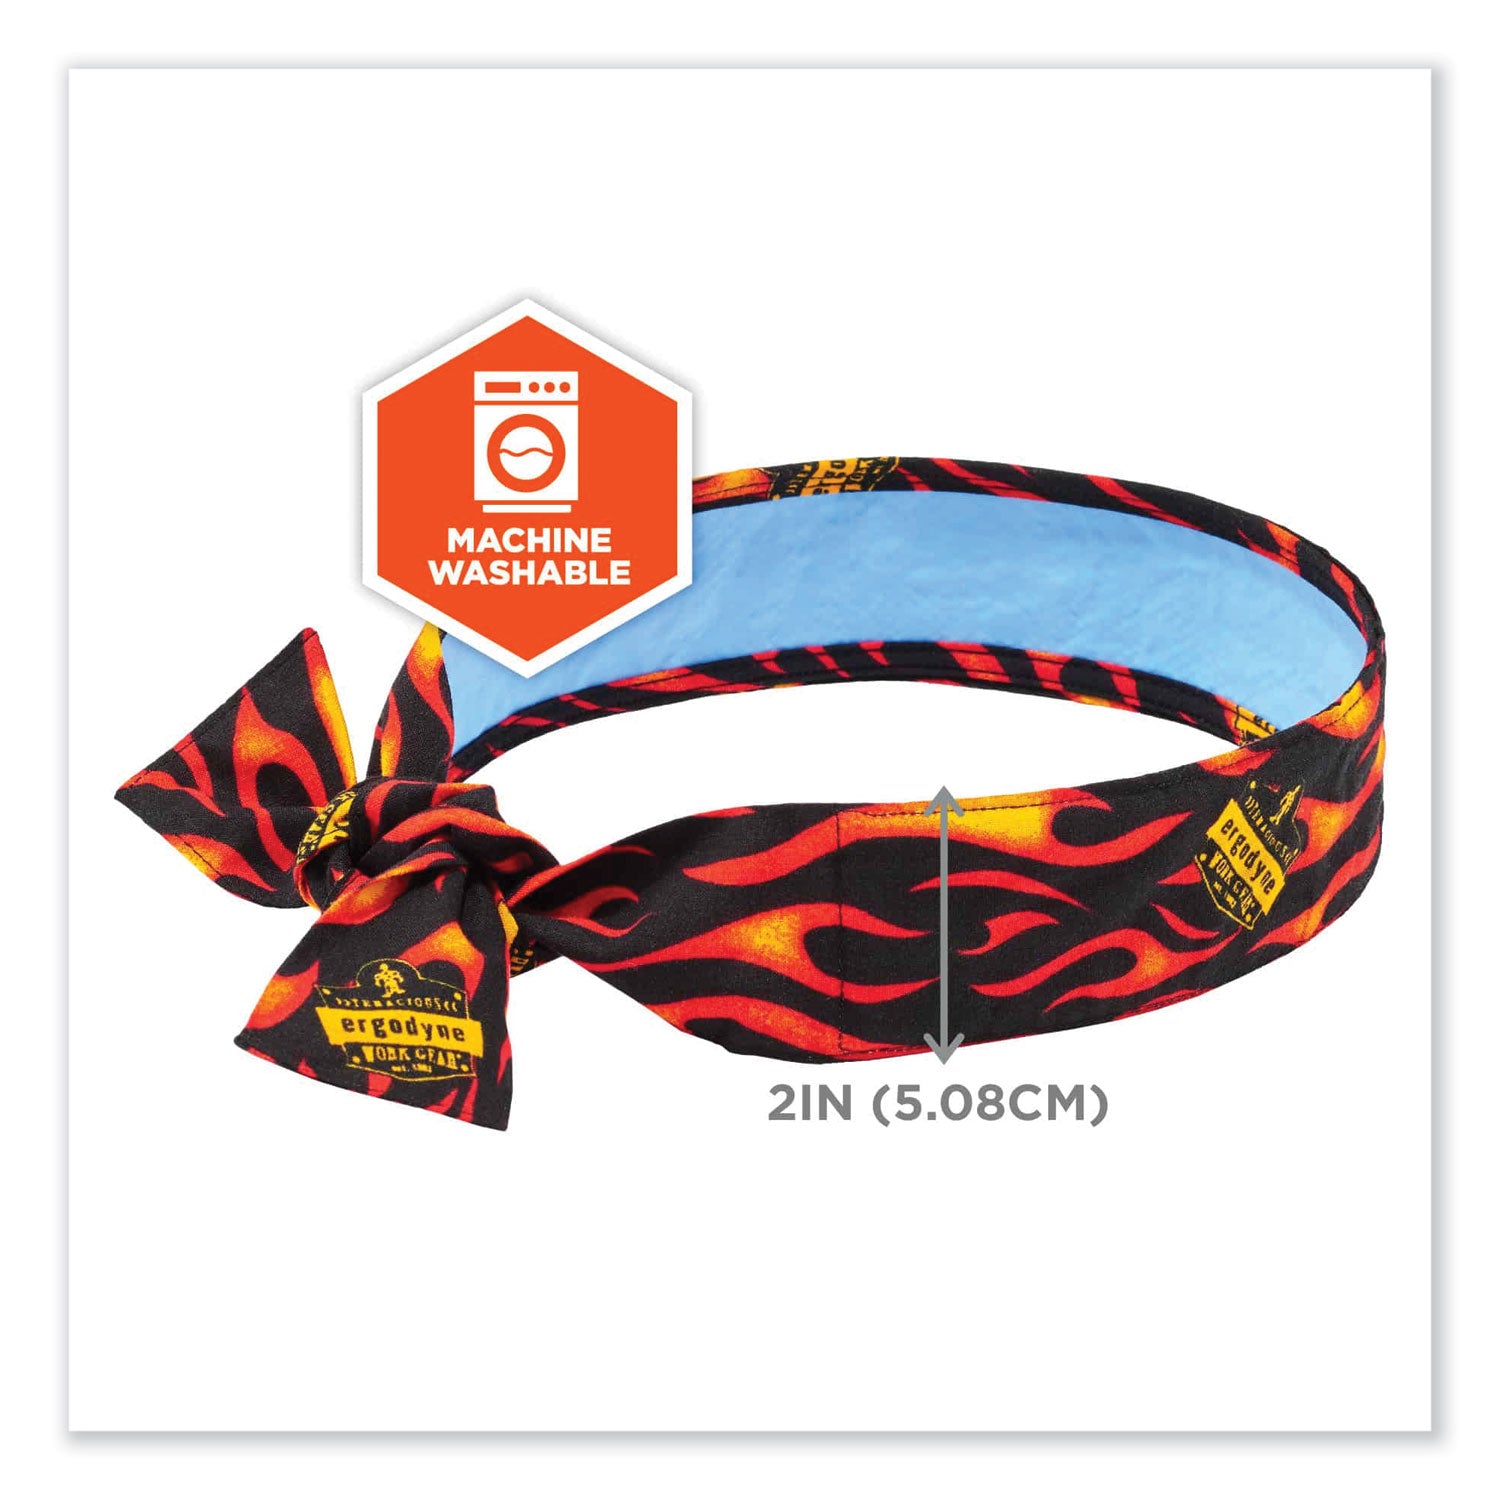 chill-its-6700ct-cooling-bandana-pva-tie-headband-one-size-fits-most-flames-ships-in-1-3-business-days_ego12568 - 7